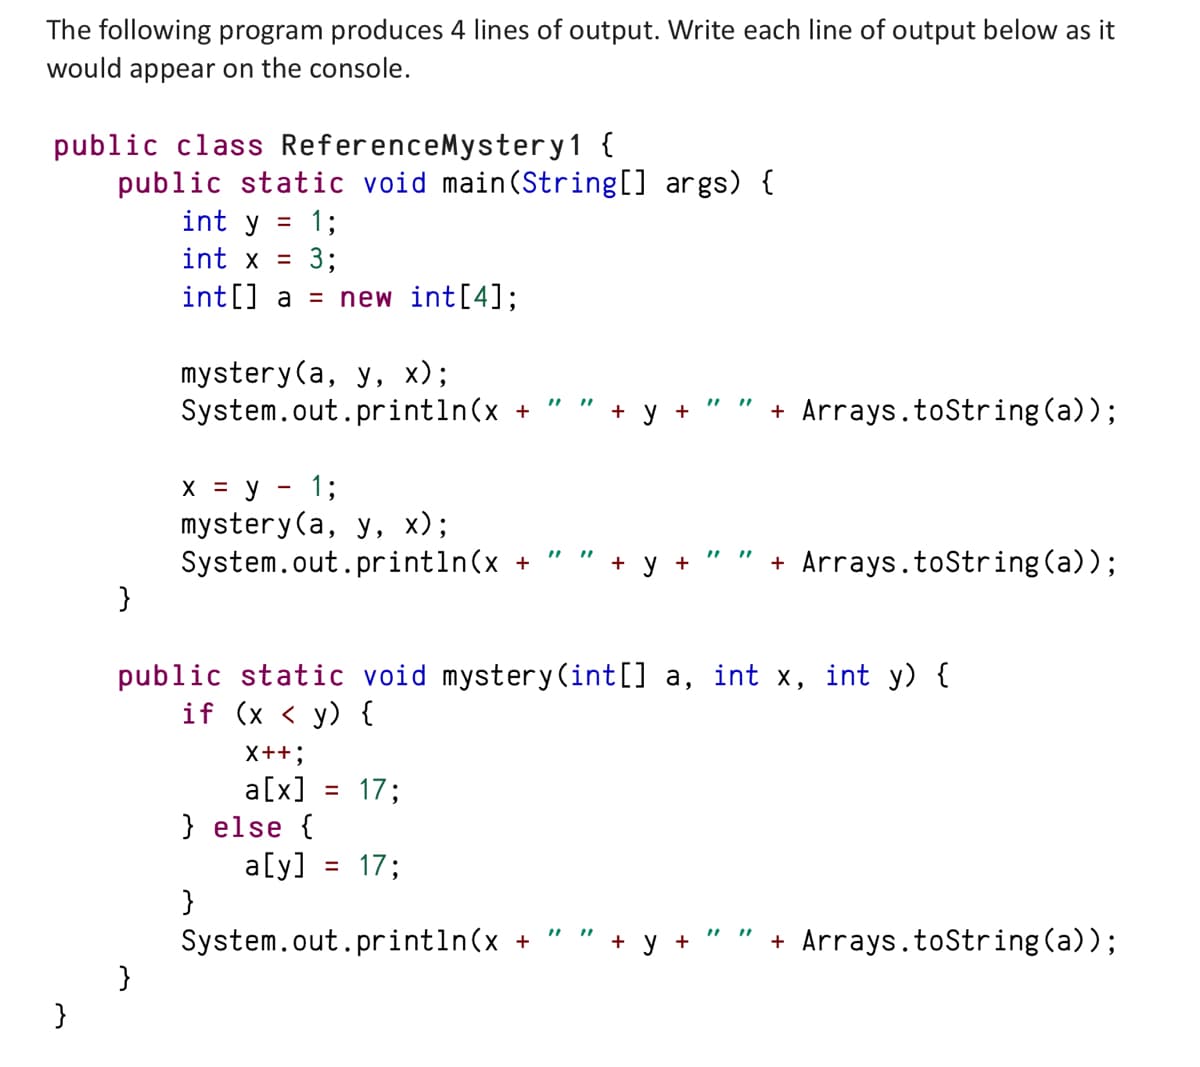 The following program produces 4 lines of output. Write each line of output below as it
would appear on the console.
public class ReferenceMystery1 {
public static void main(String[] args) {
int y = 1;
int x = 3;
int[] a = new int[4];
}
}
mystery (a, y, x);
System.out.println(x +
}
x = y = 1;
mystery(a, y, x);
System.out.println(x +
public static void mystery(int[] a, int x, int y) {
if (x < y) {
X++;
a[x] = 17;
} else {
a[y] = 17;
System.out.println(x +
}
+ Arrays.toString(a));
+
+ Arrays.toString(a));
+ + Arrays.toString(a));